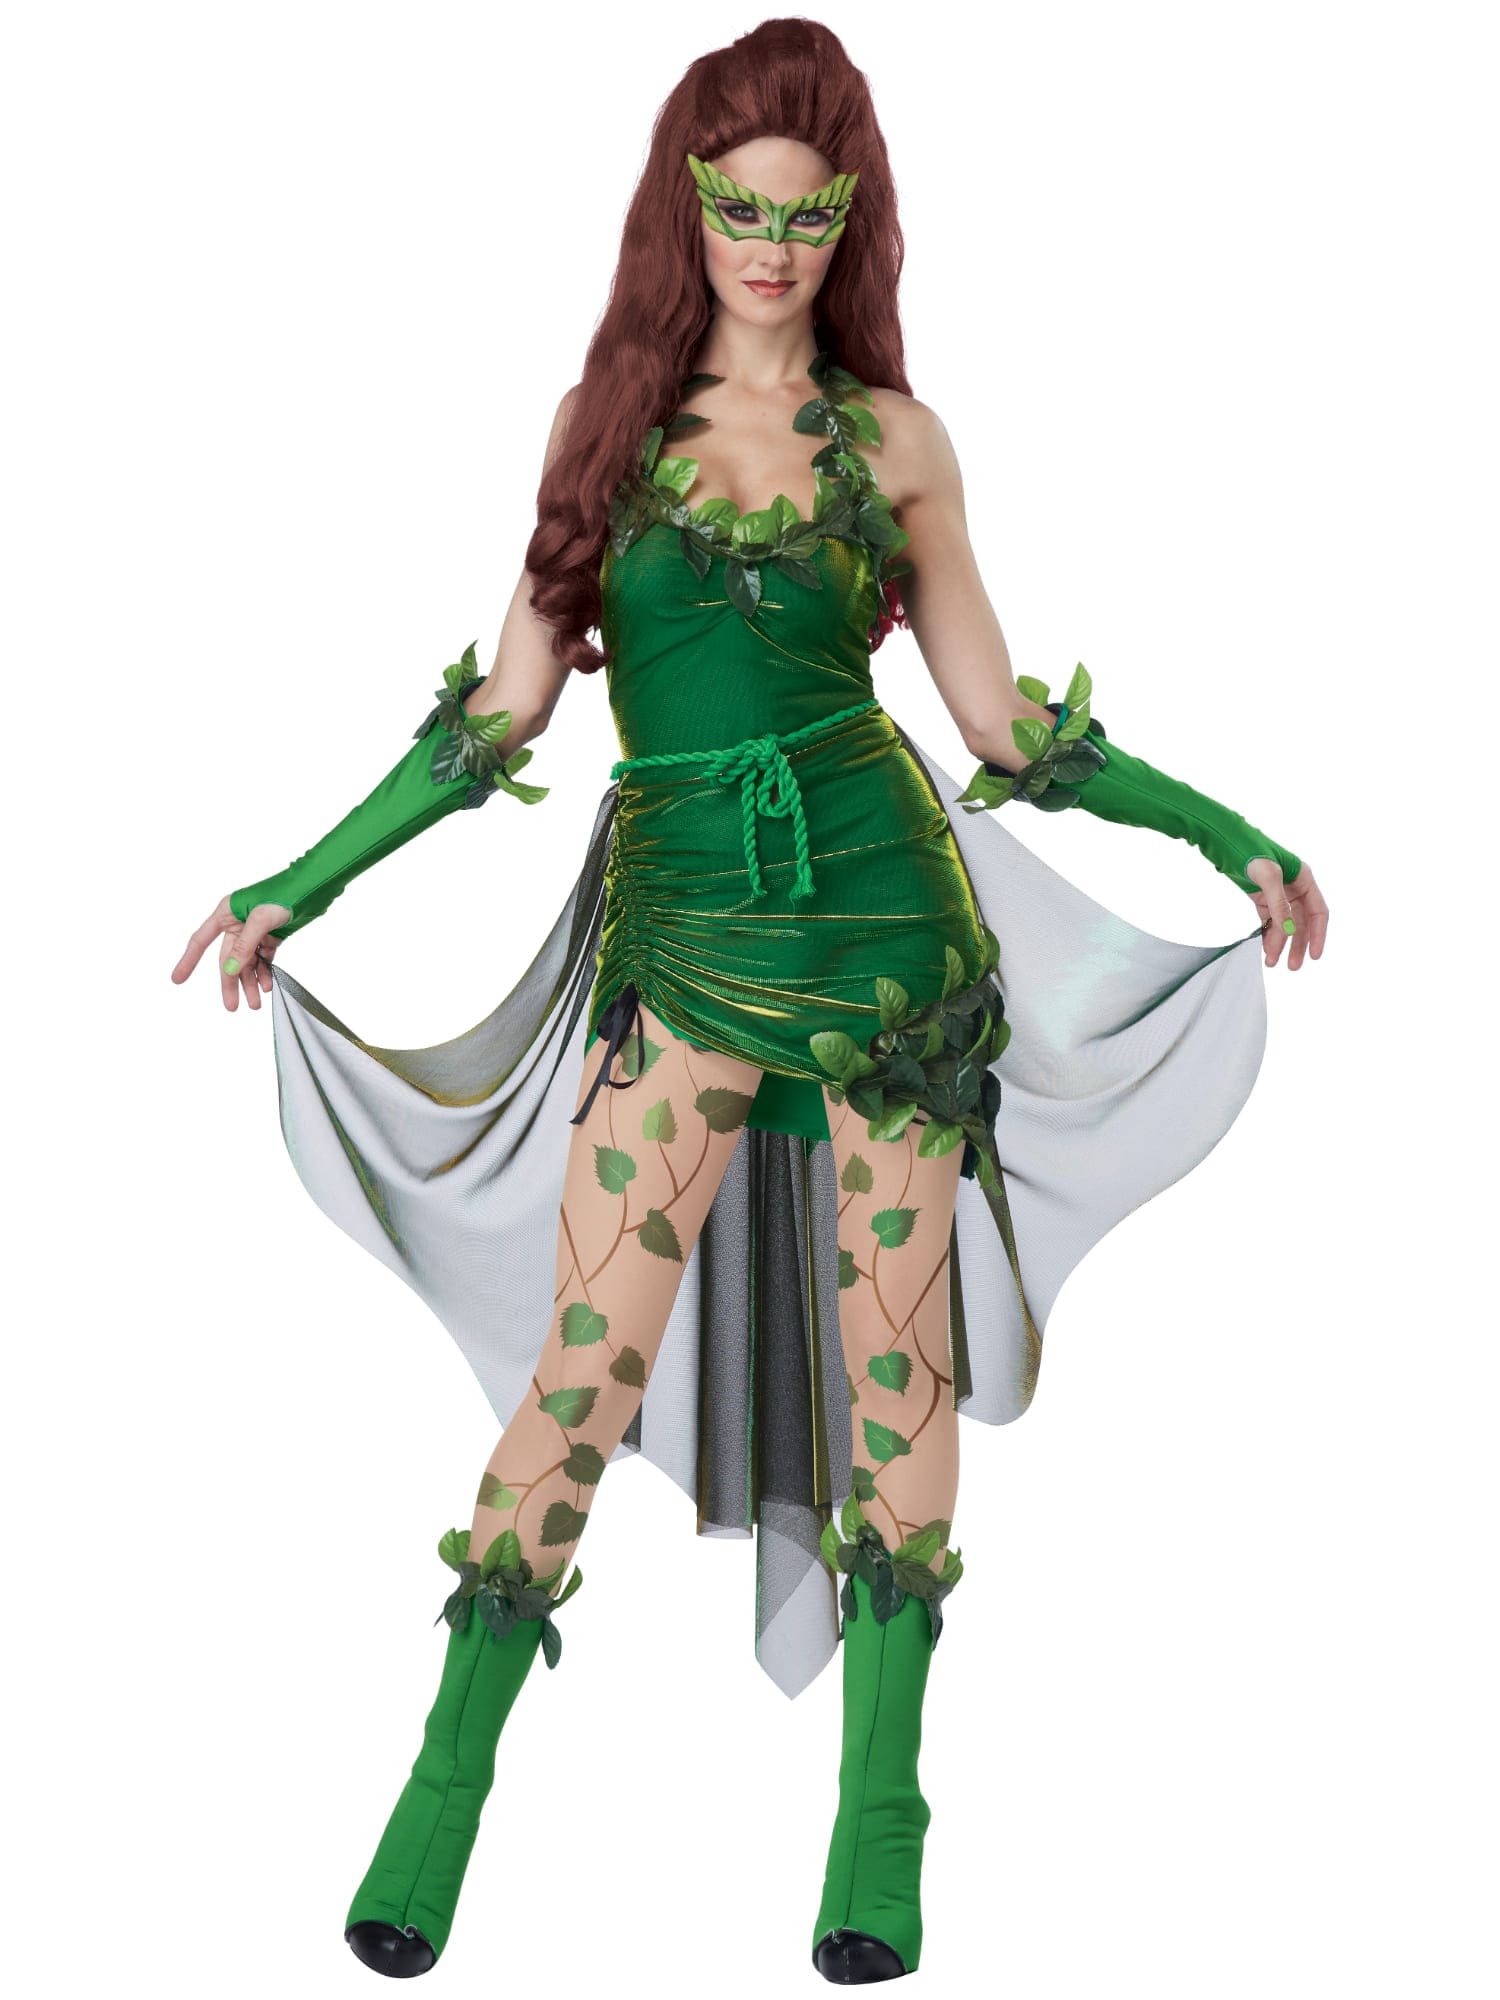 Hobbypos Lethal Beauty Poison Villain Supervillainess Adult Womens Costume